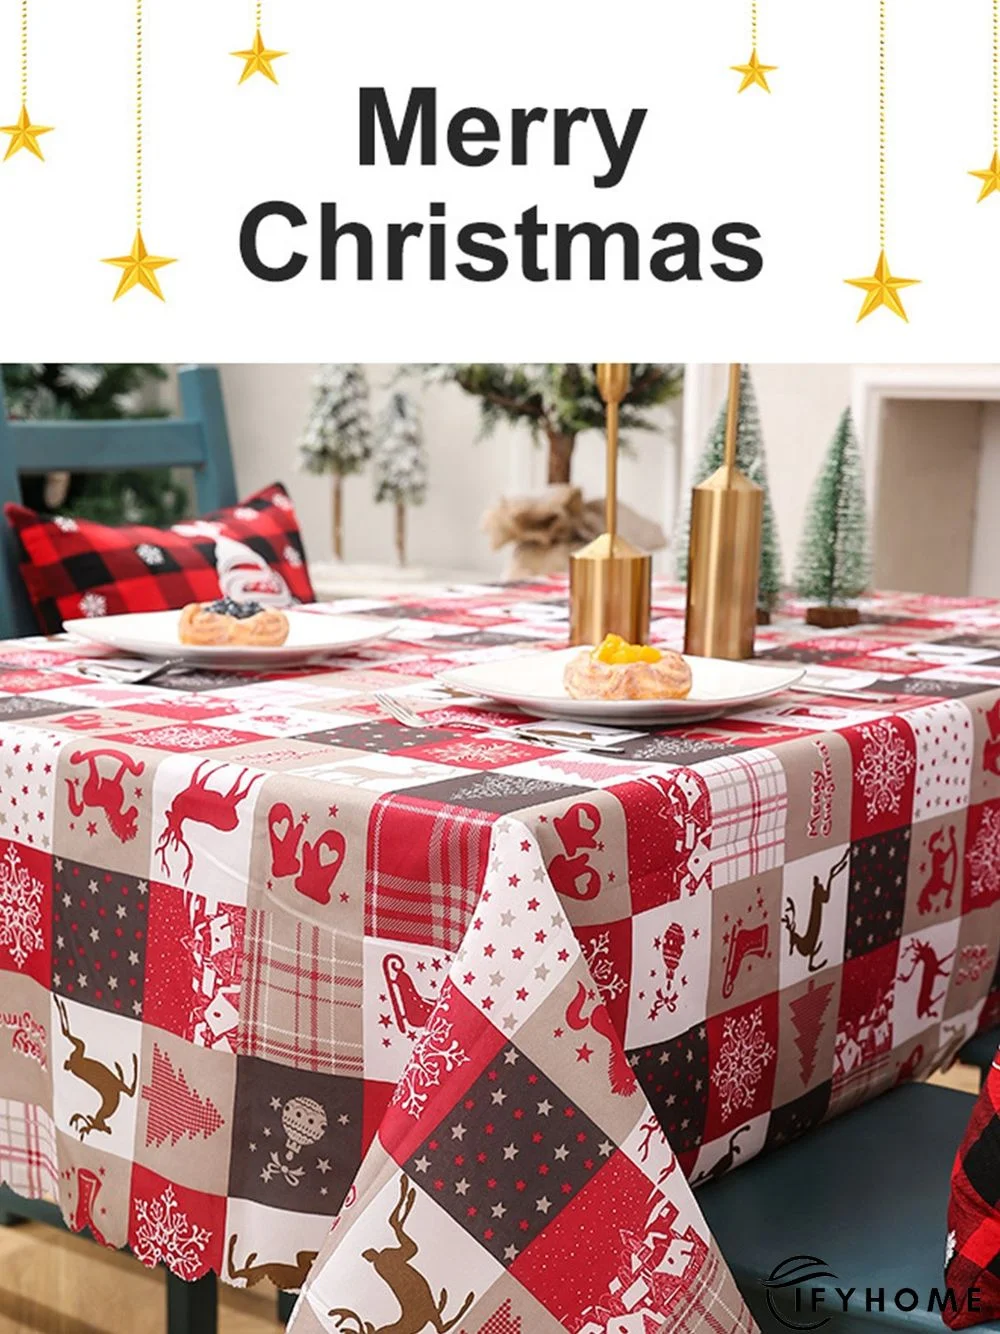 Creative Christmas Printed Tablecloths Table Runners Party Decorations | IFYHOME